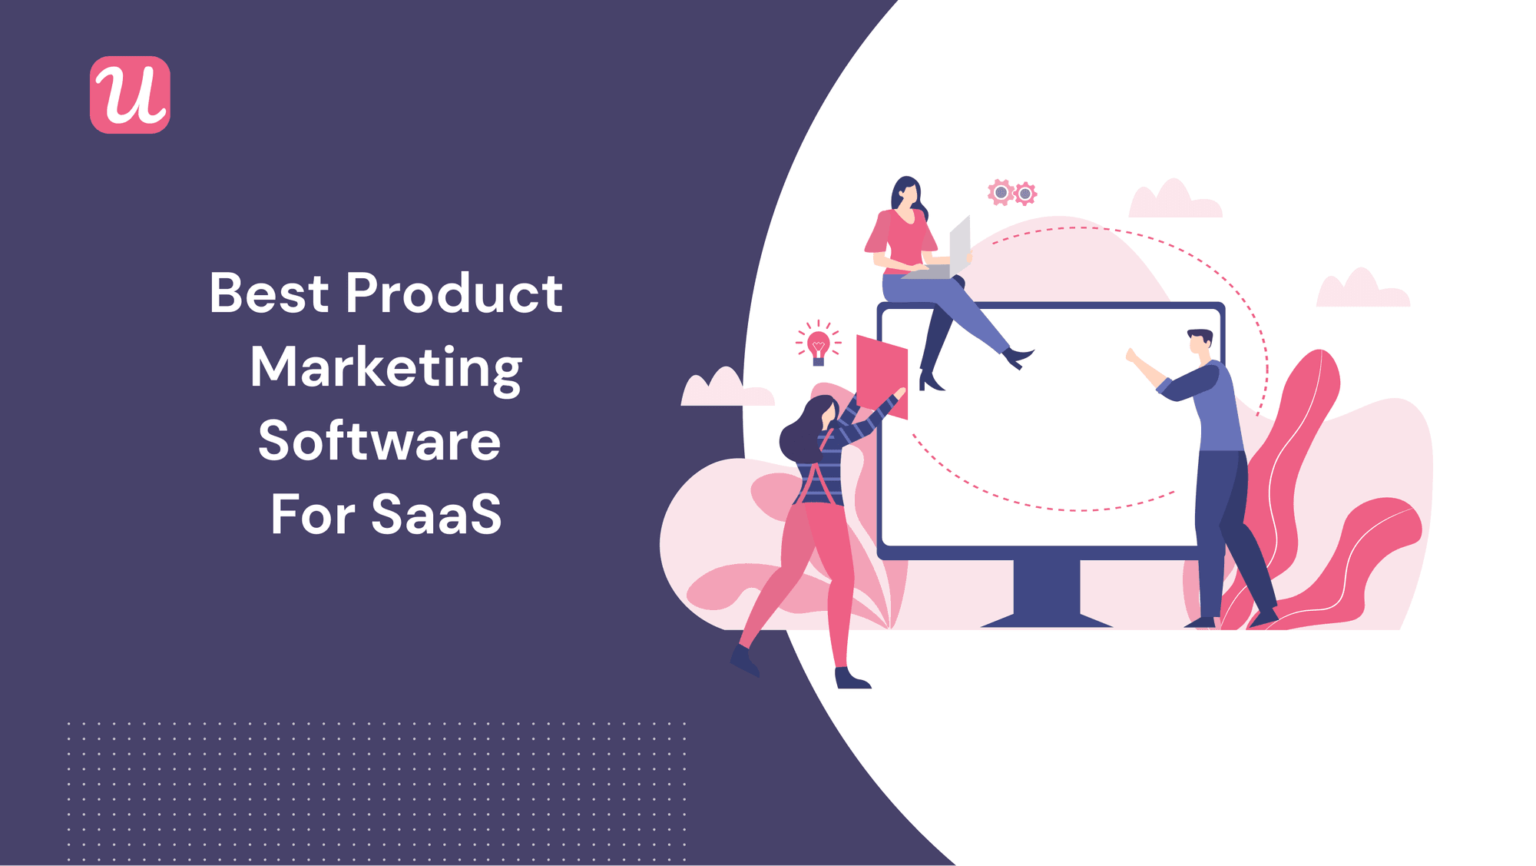 Best product marketing software for SaaS